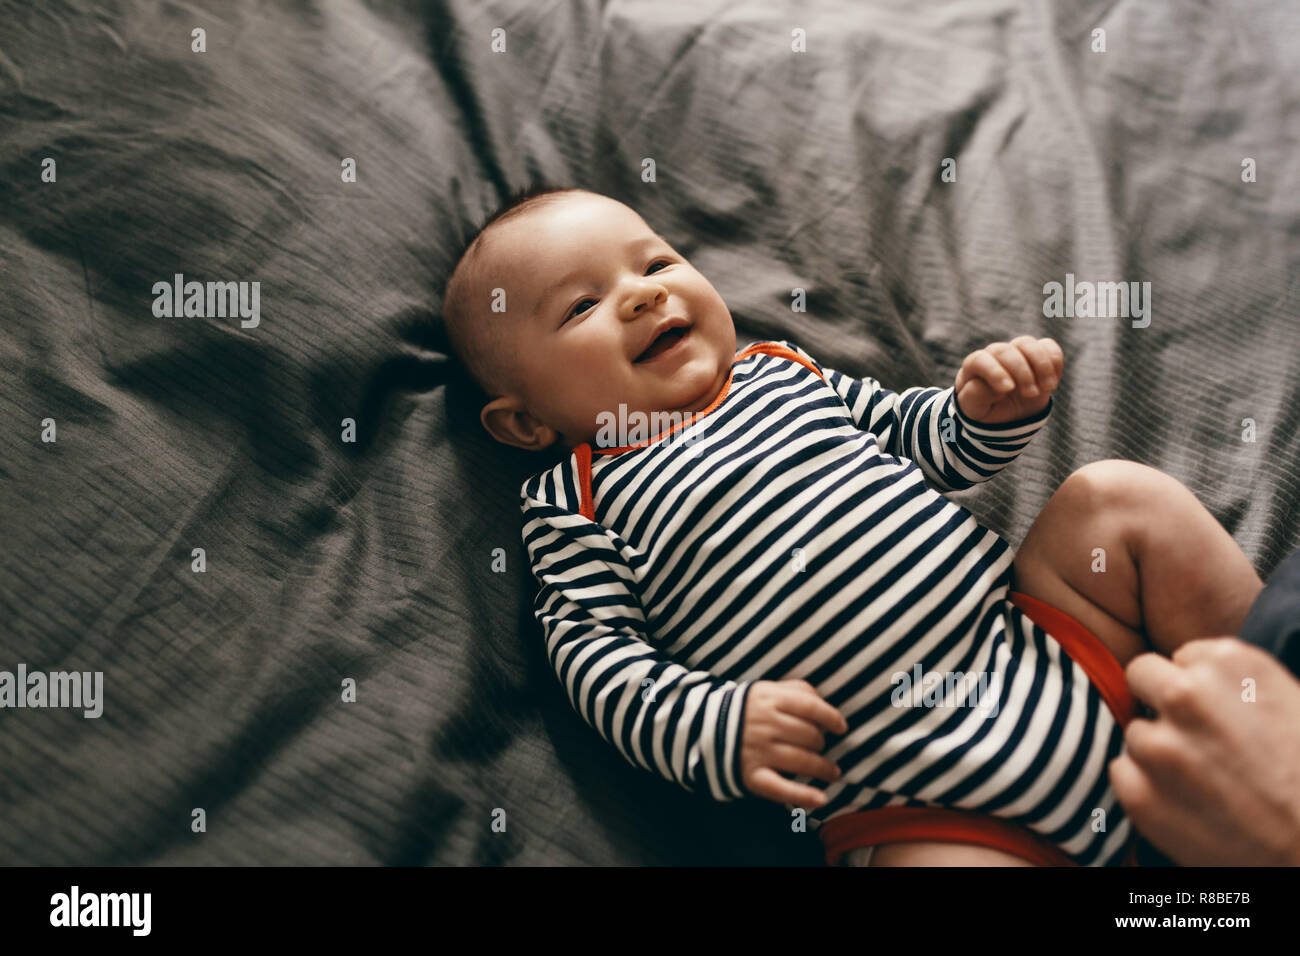 Top view of a smiling infant lying on bed. Cheerful little baby in a playful mood lying on bed. Stock Photo